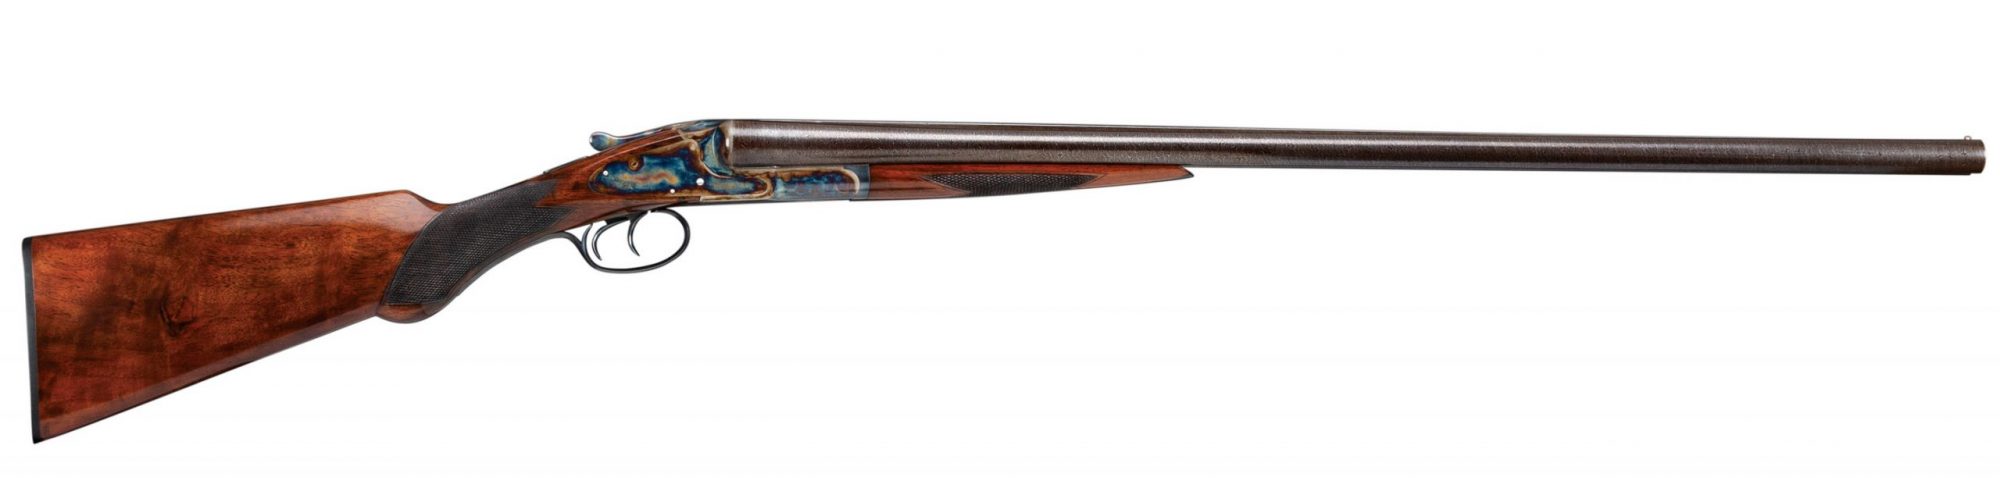 Photo of a restored L.C. Smith 12 gauge shotgun, after restoration work by Turnbull Restoration of Bloomfield NY